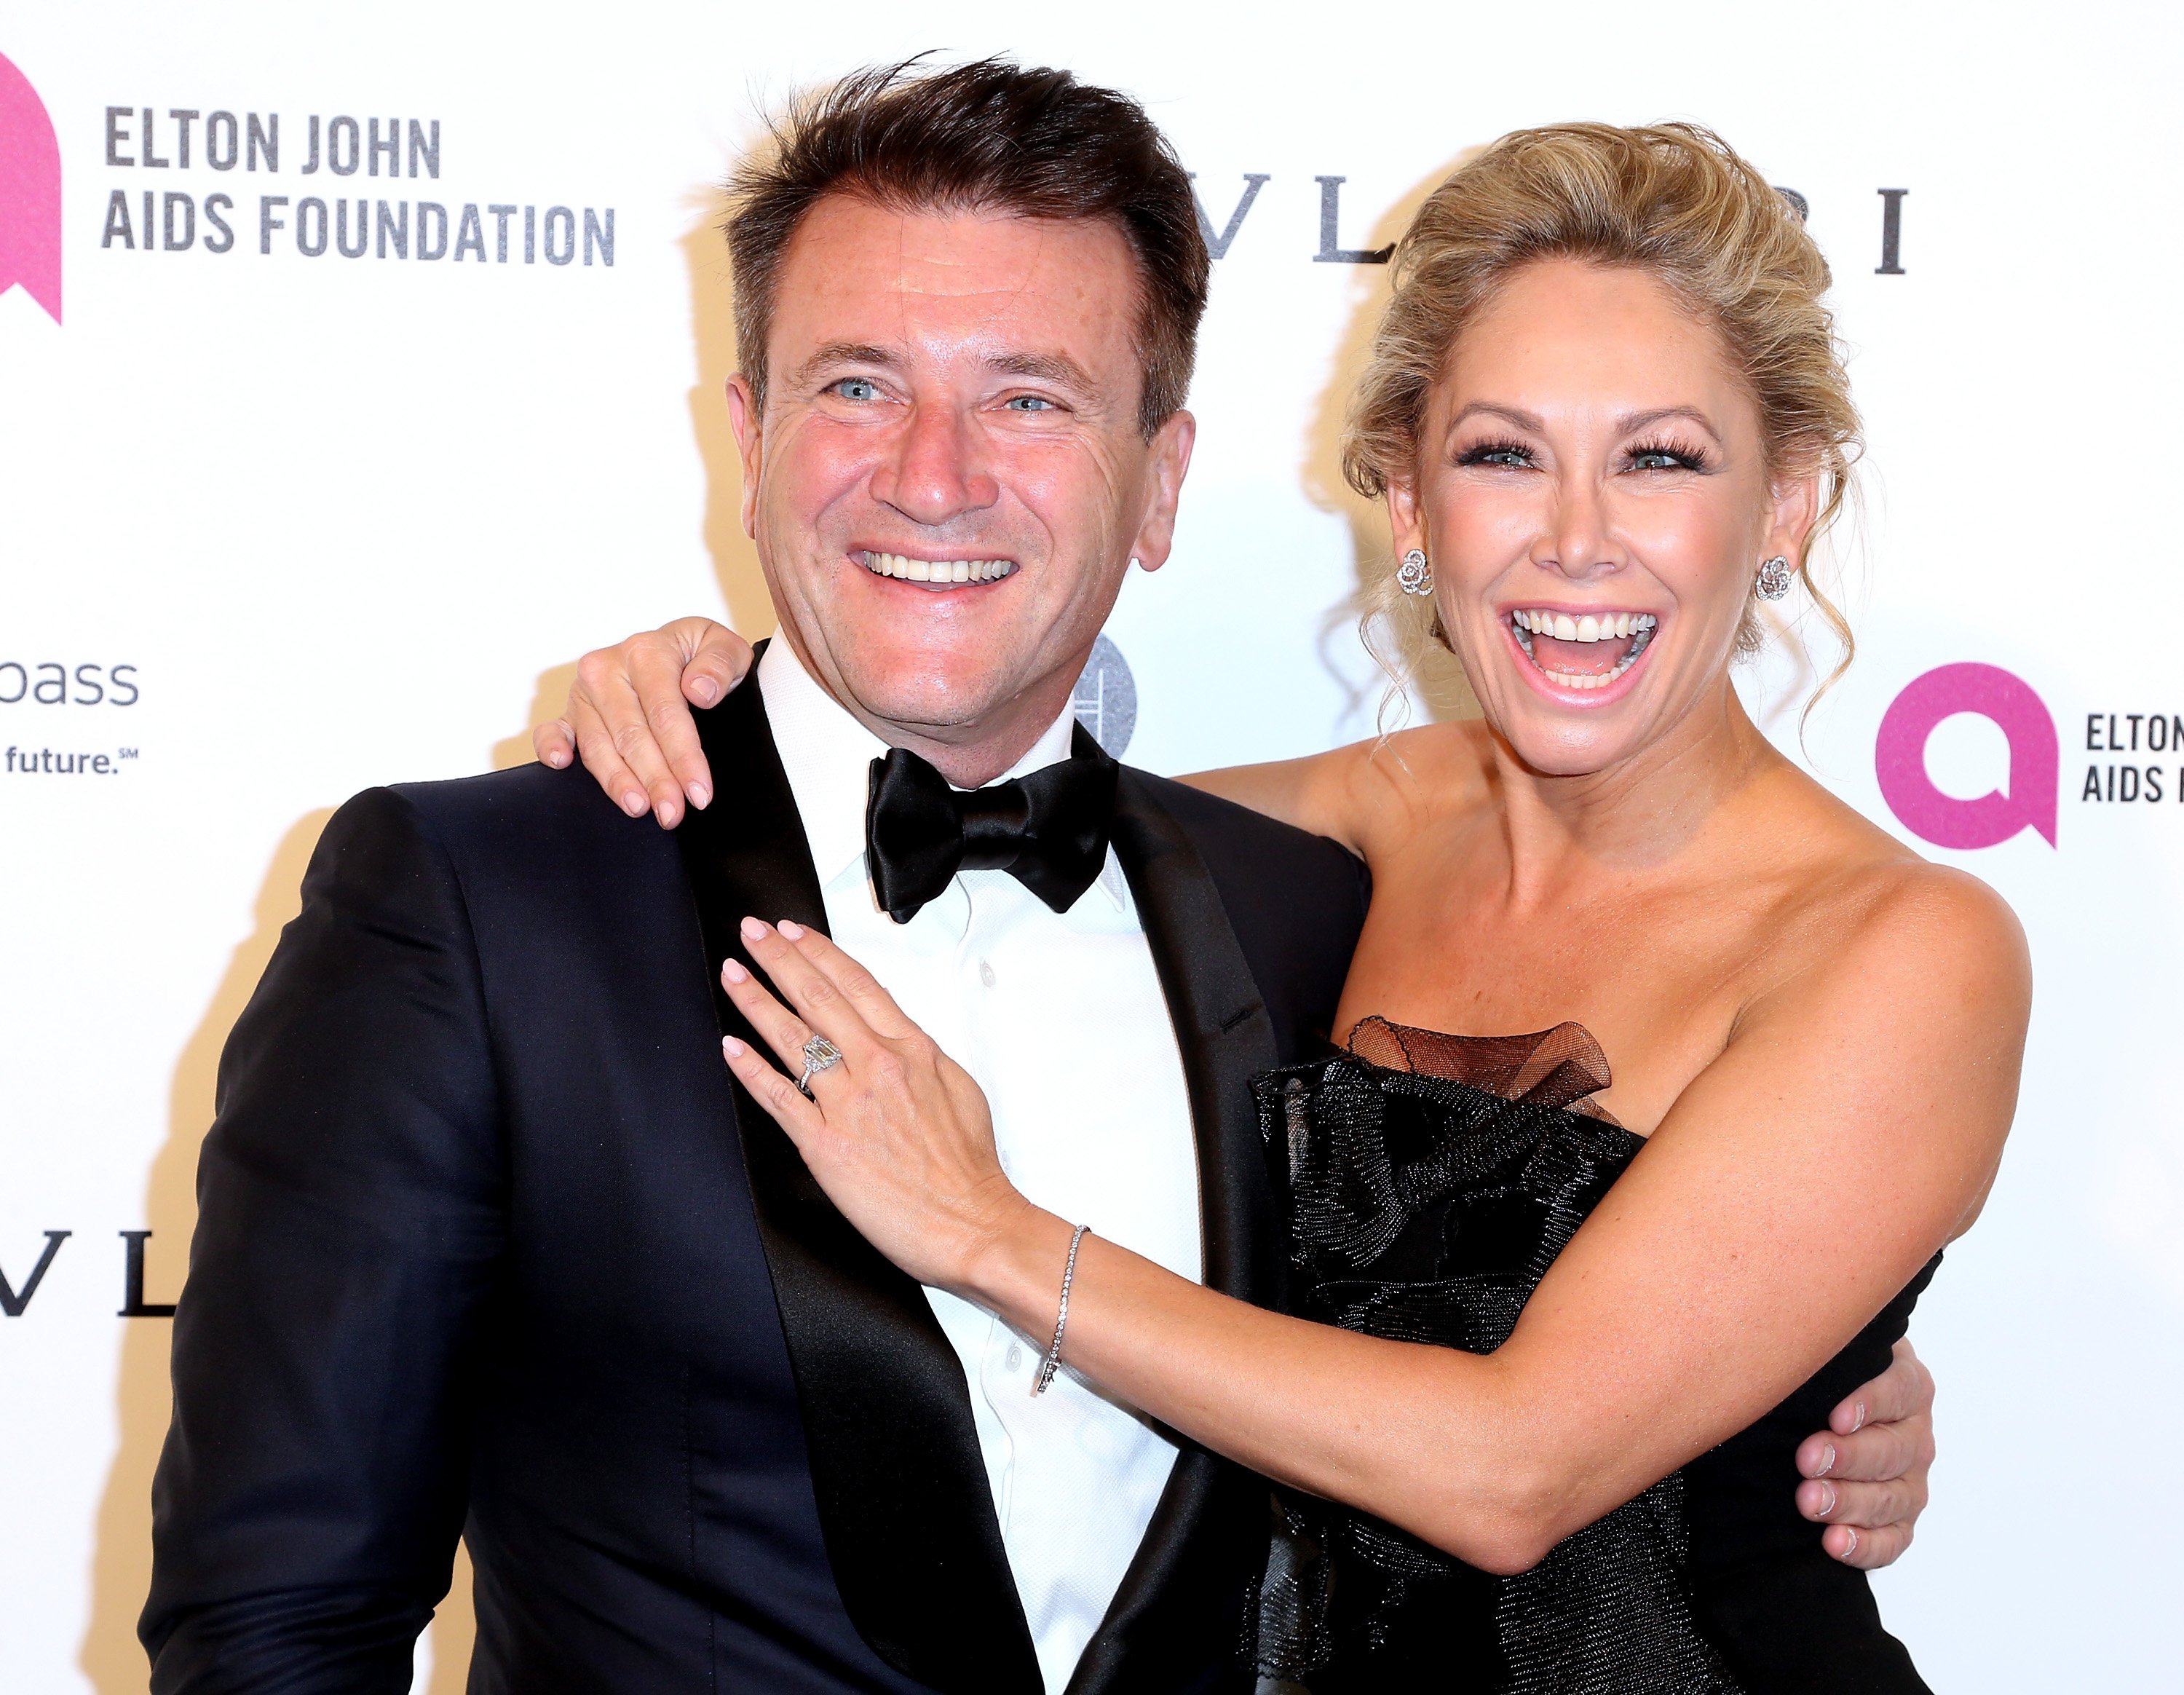 Kym Johnson and Robert Herjavec attend the 24th Annual Elton John AIDS Foundation's Oscar Viewing Party on February 28, 2016, in West Hollywood, California. | Source: Getty Images.